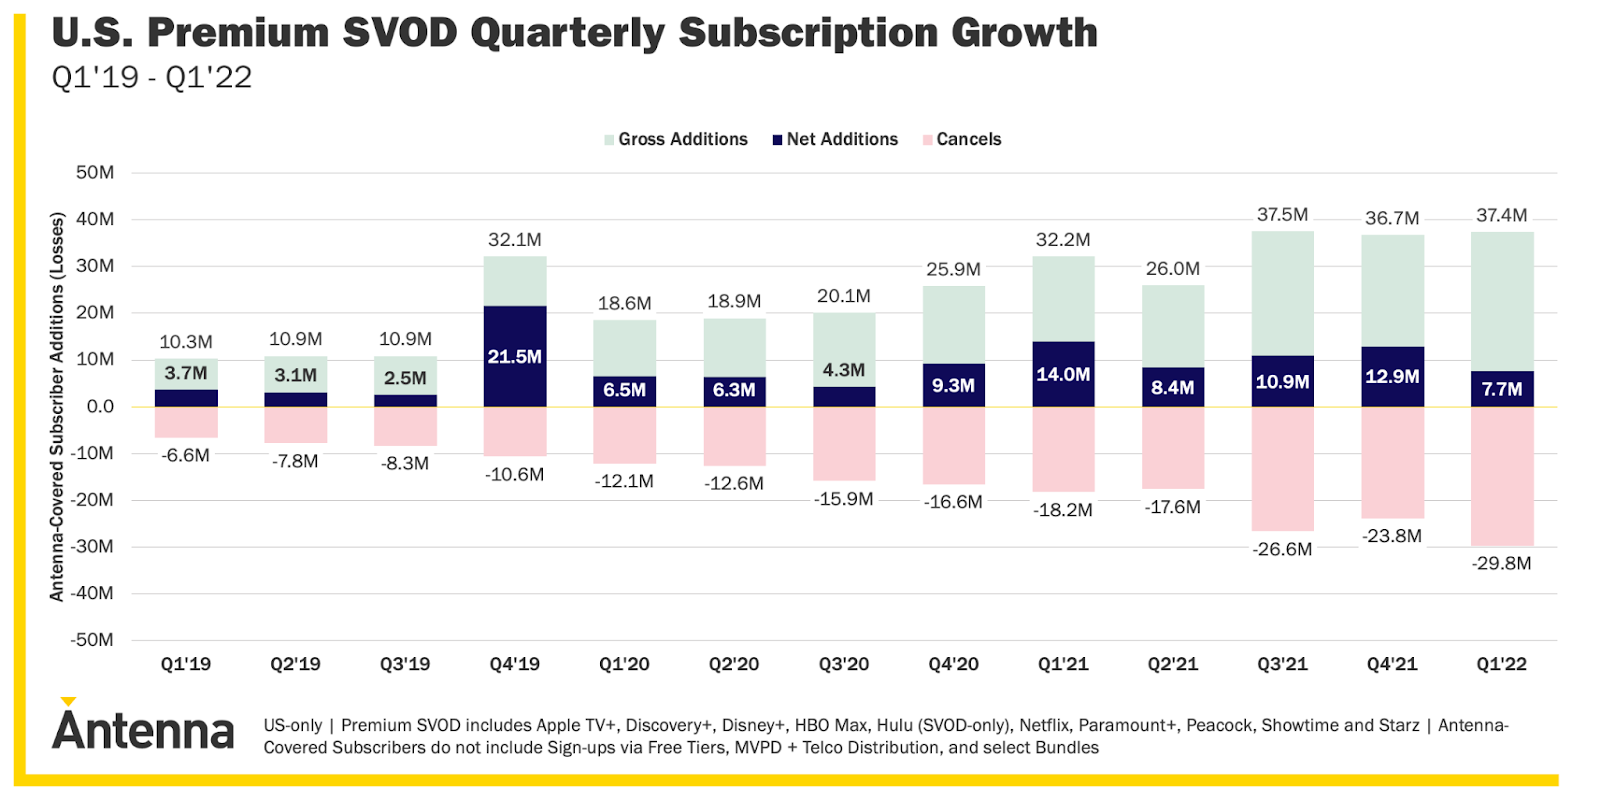 Antenna observed 37.4M new Premium SVOD Subscriptions in the Q1’22